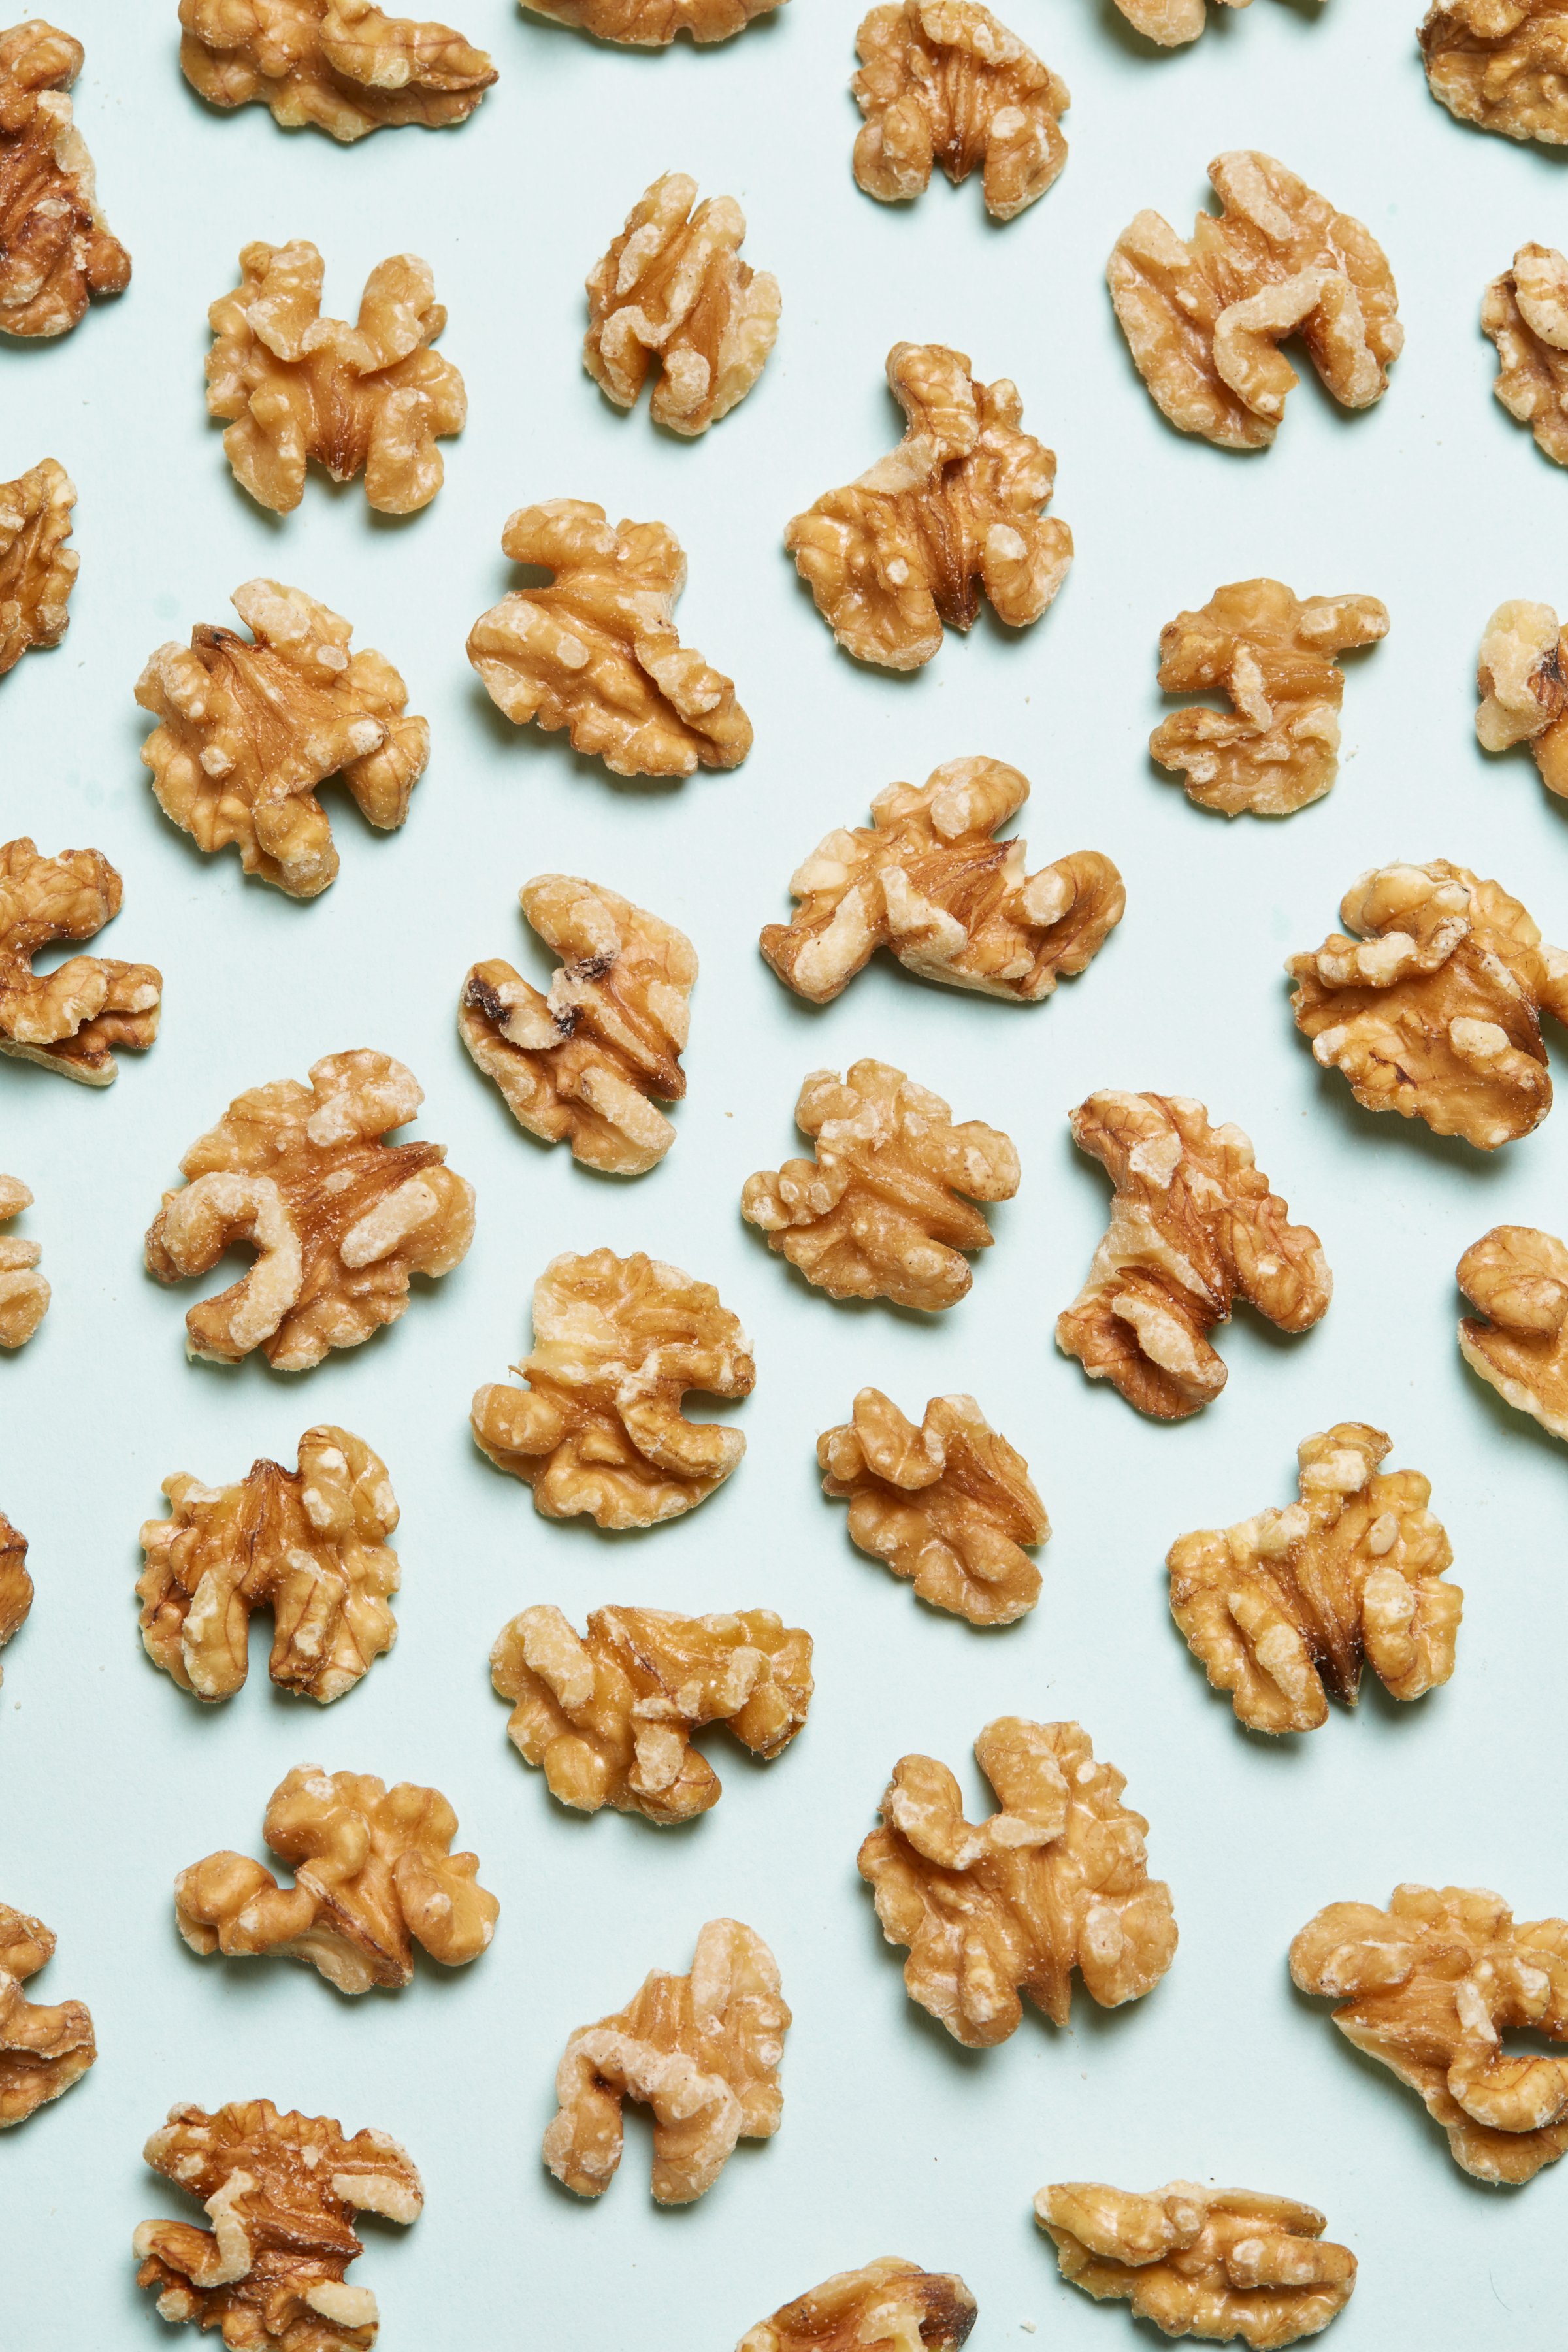 healthy and filling, health food, diet, nutrition, time.com stock, walnuts